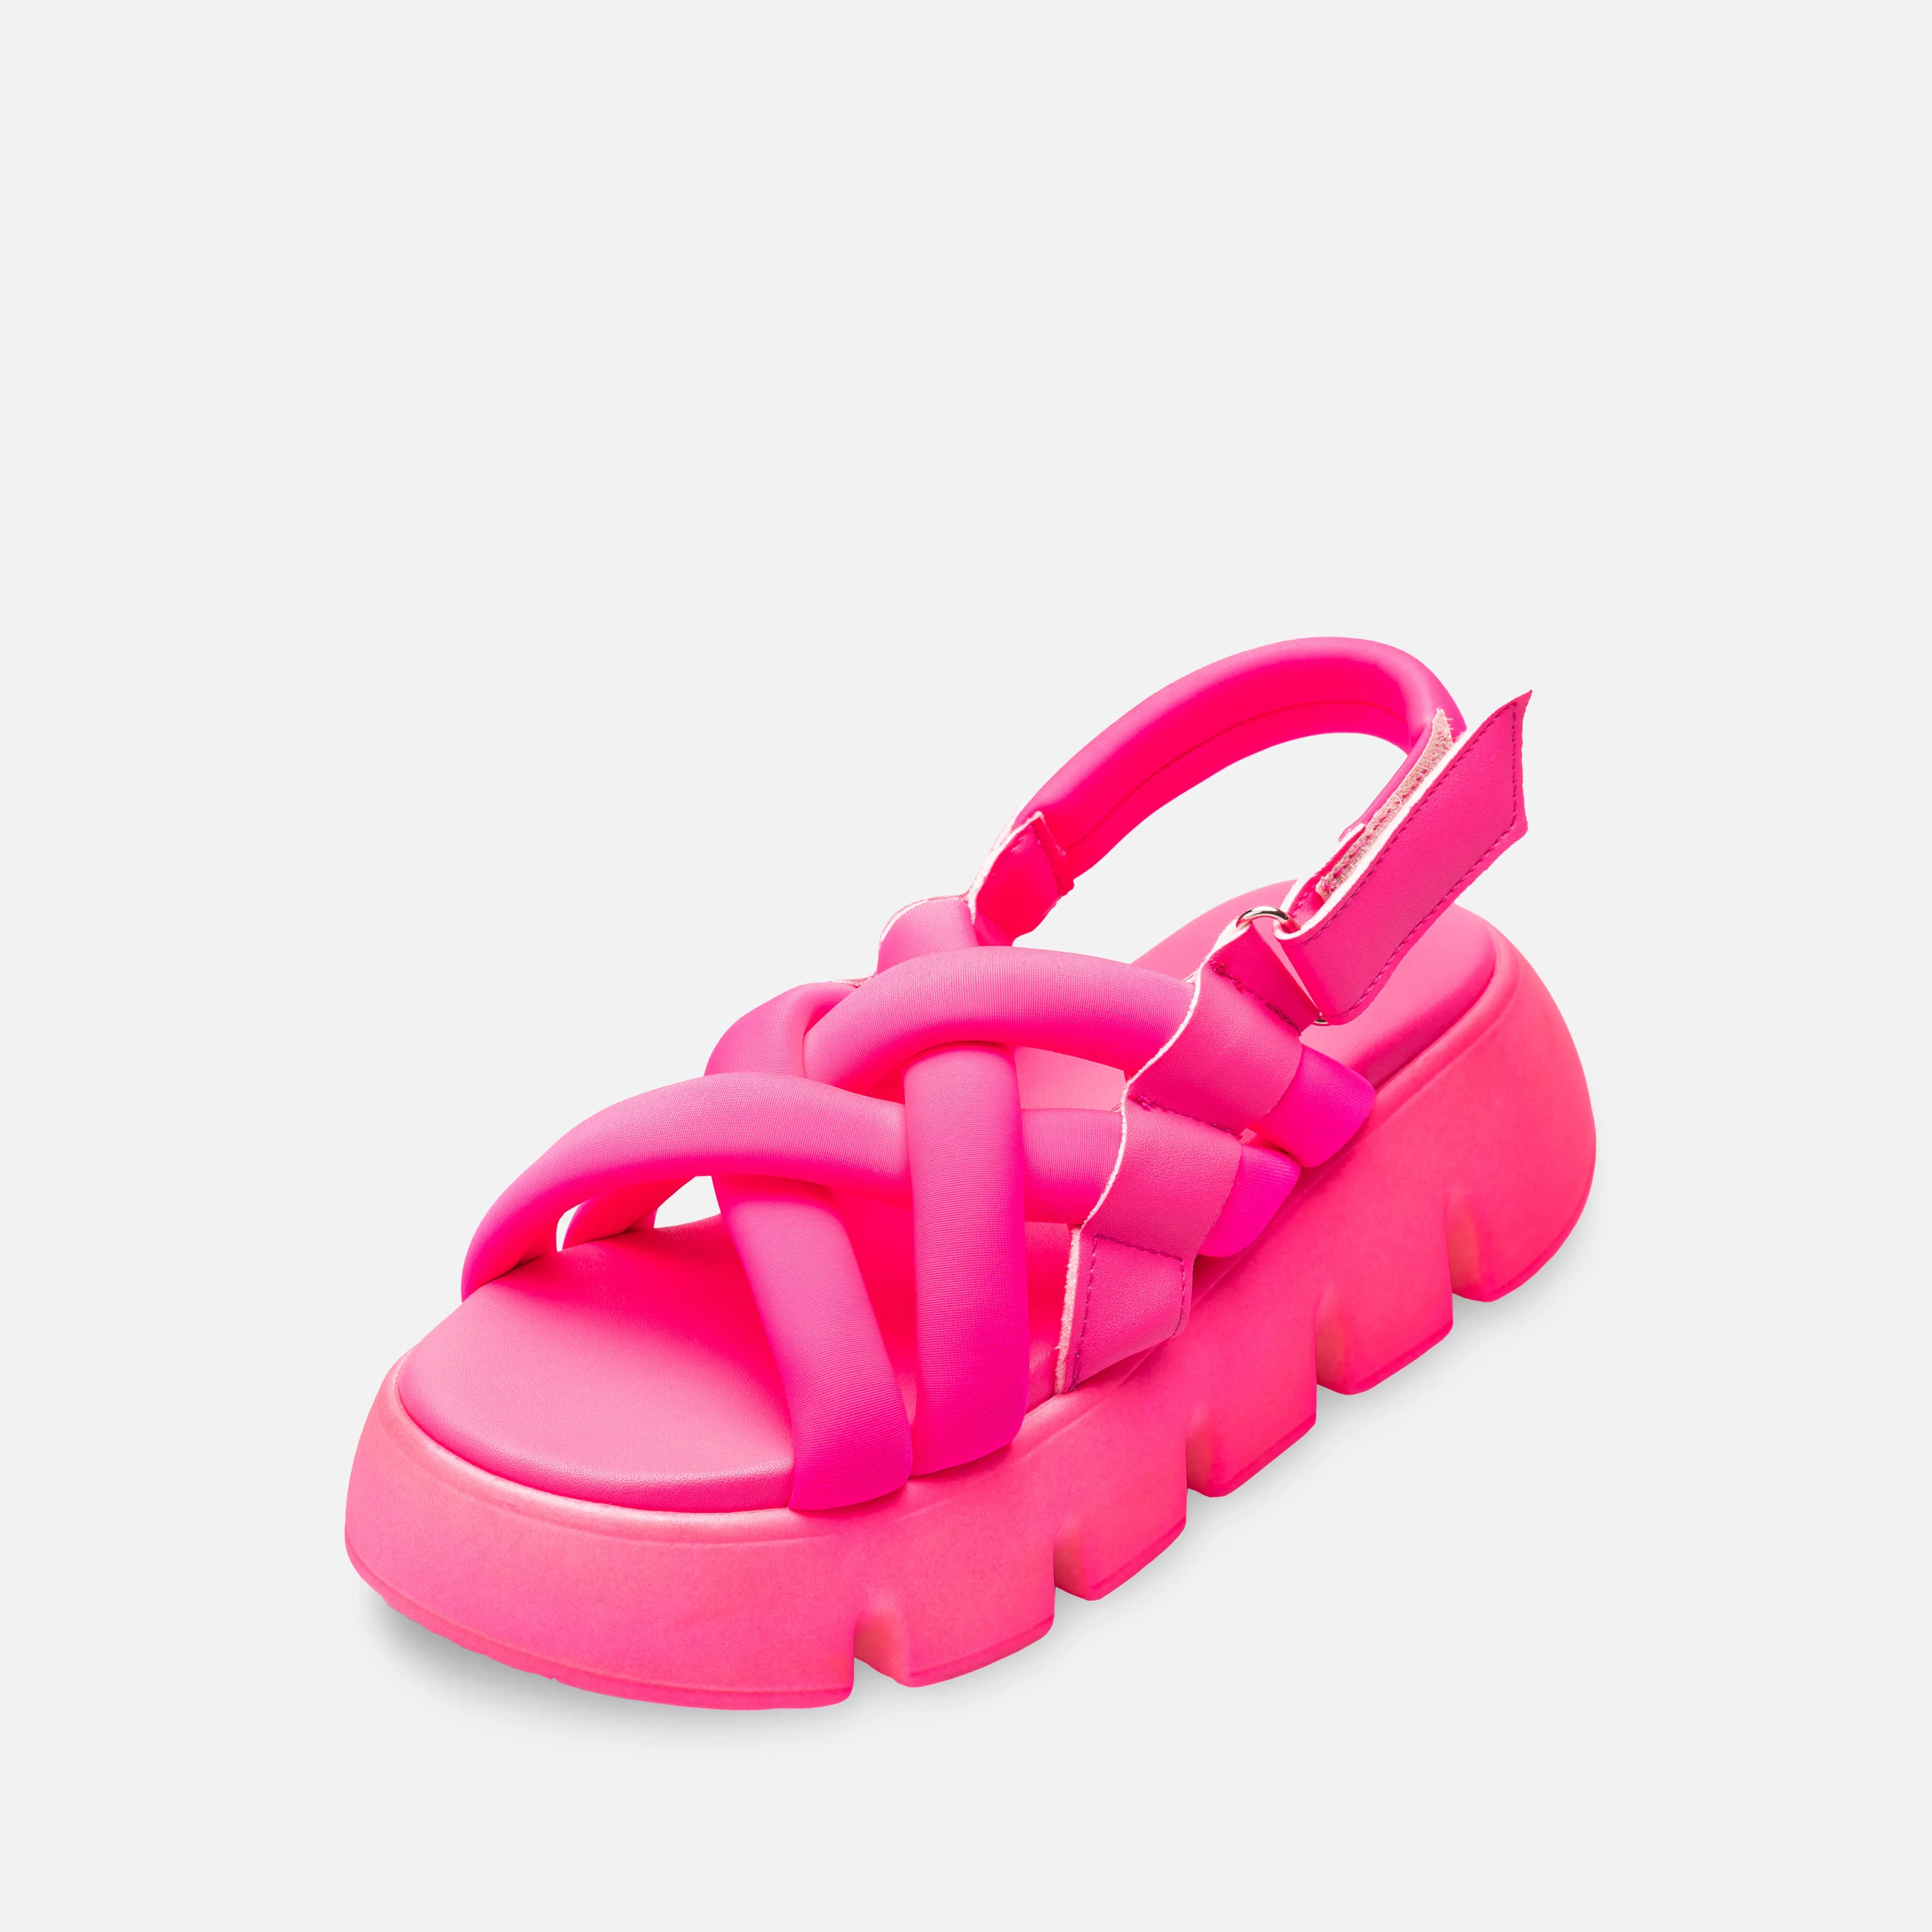 Neon Scuba Fabric Thick Comfortable Sole Sandals - Pink